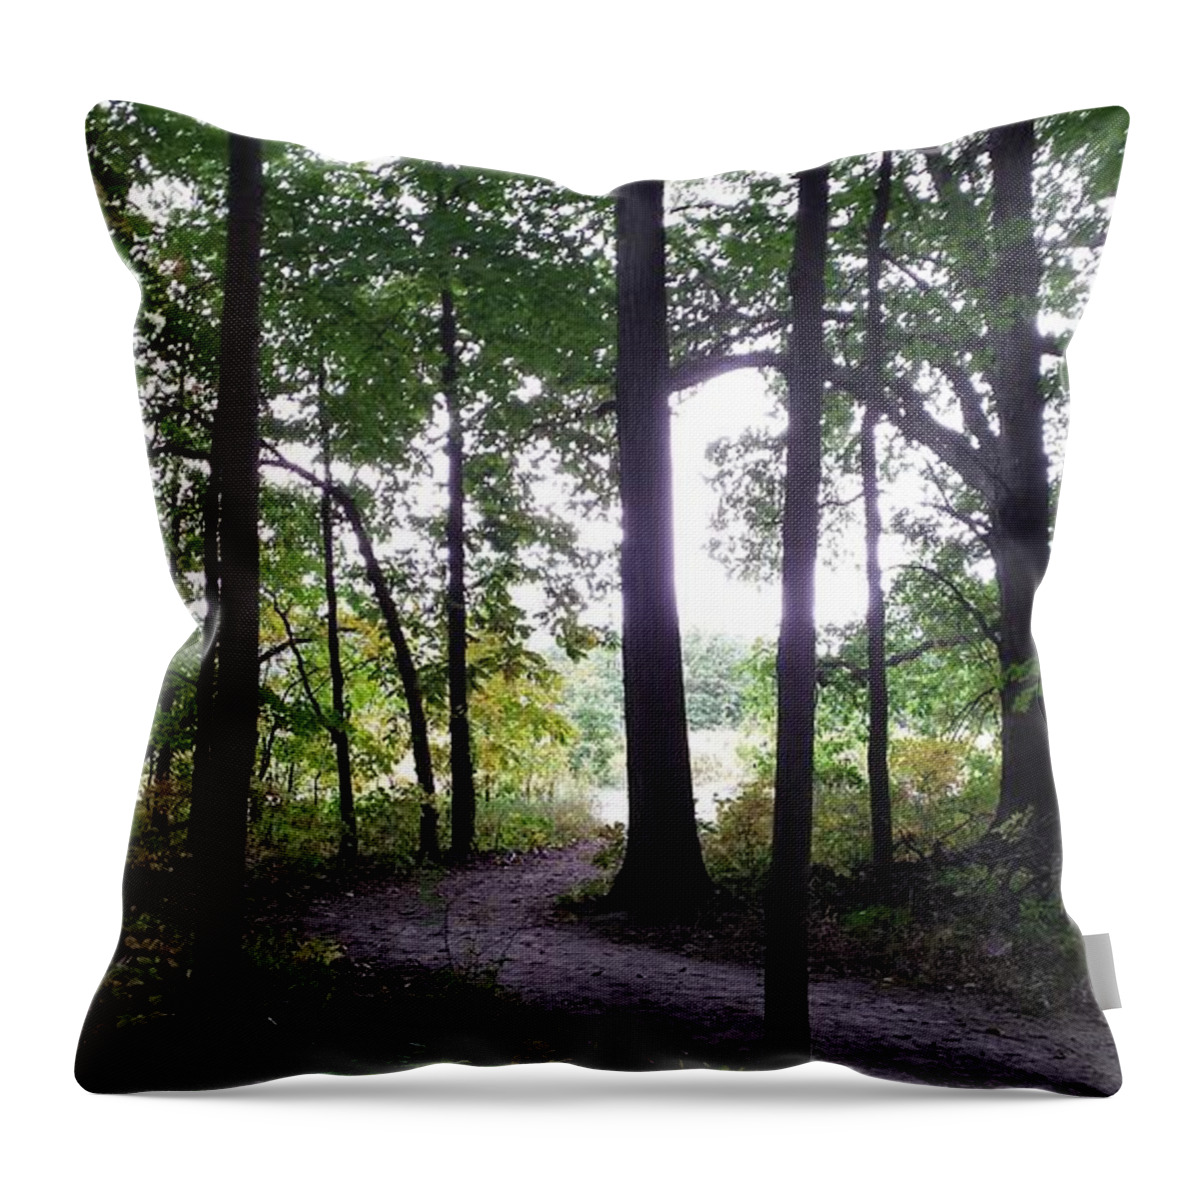 Edge Of The Forest Throw Pillow featuring the photograph Edge Of The Forest by Paddy Shaffer